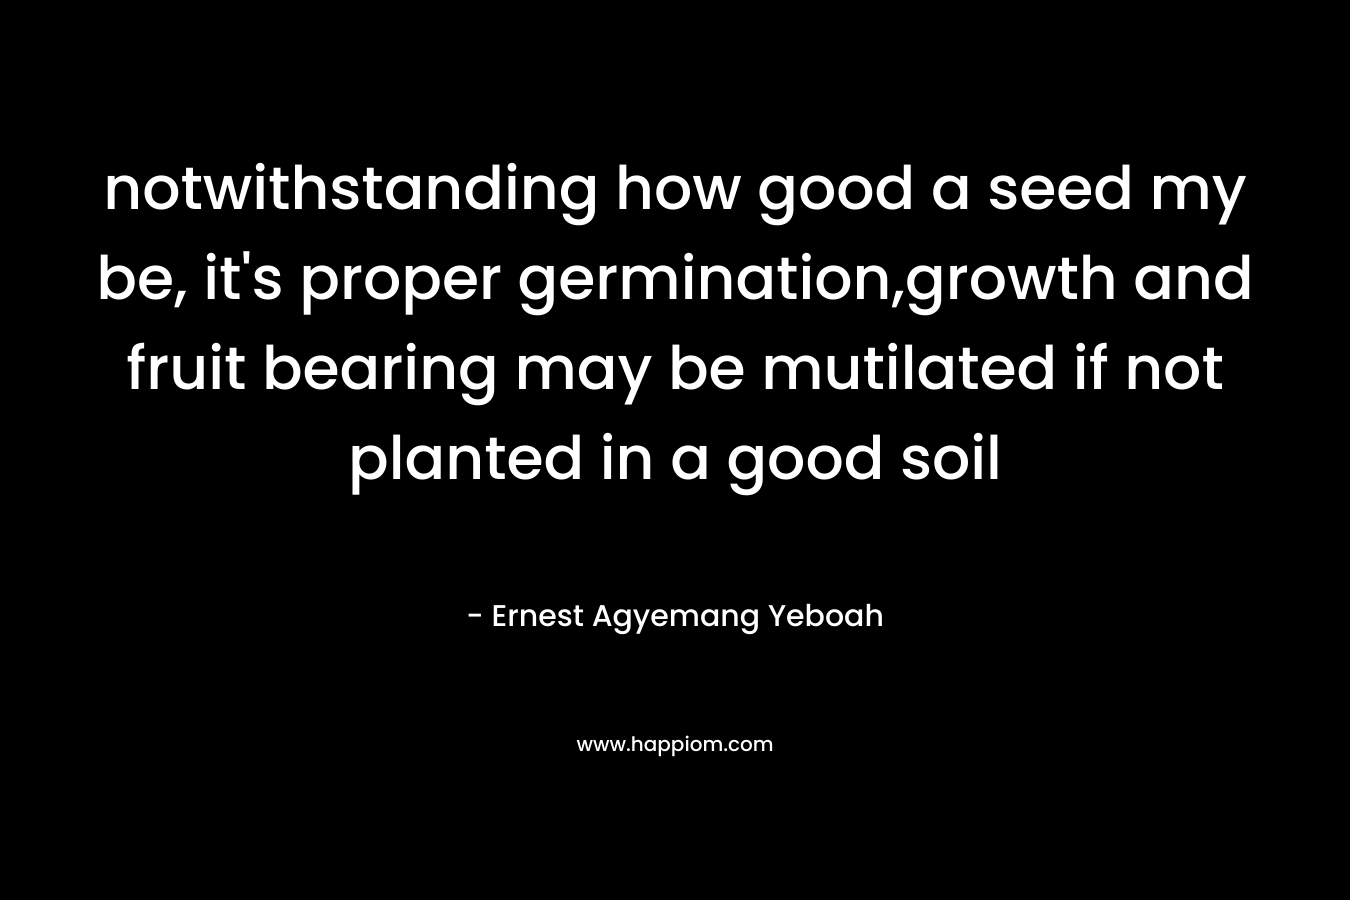 notwithstanding how good a seed my be, it’s proper germination,growth and fruit bearing may be mutilated if not planted in a good soil – Ernest Agyemang Yeboah